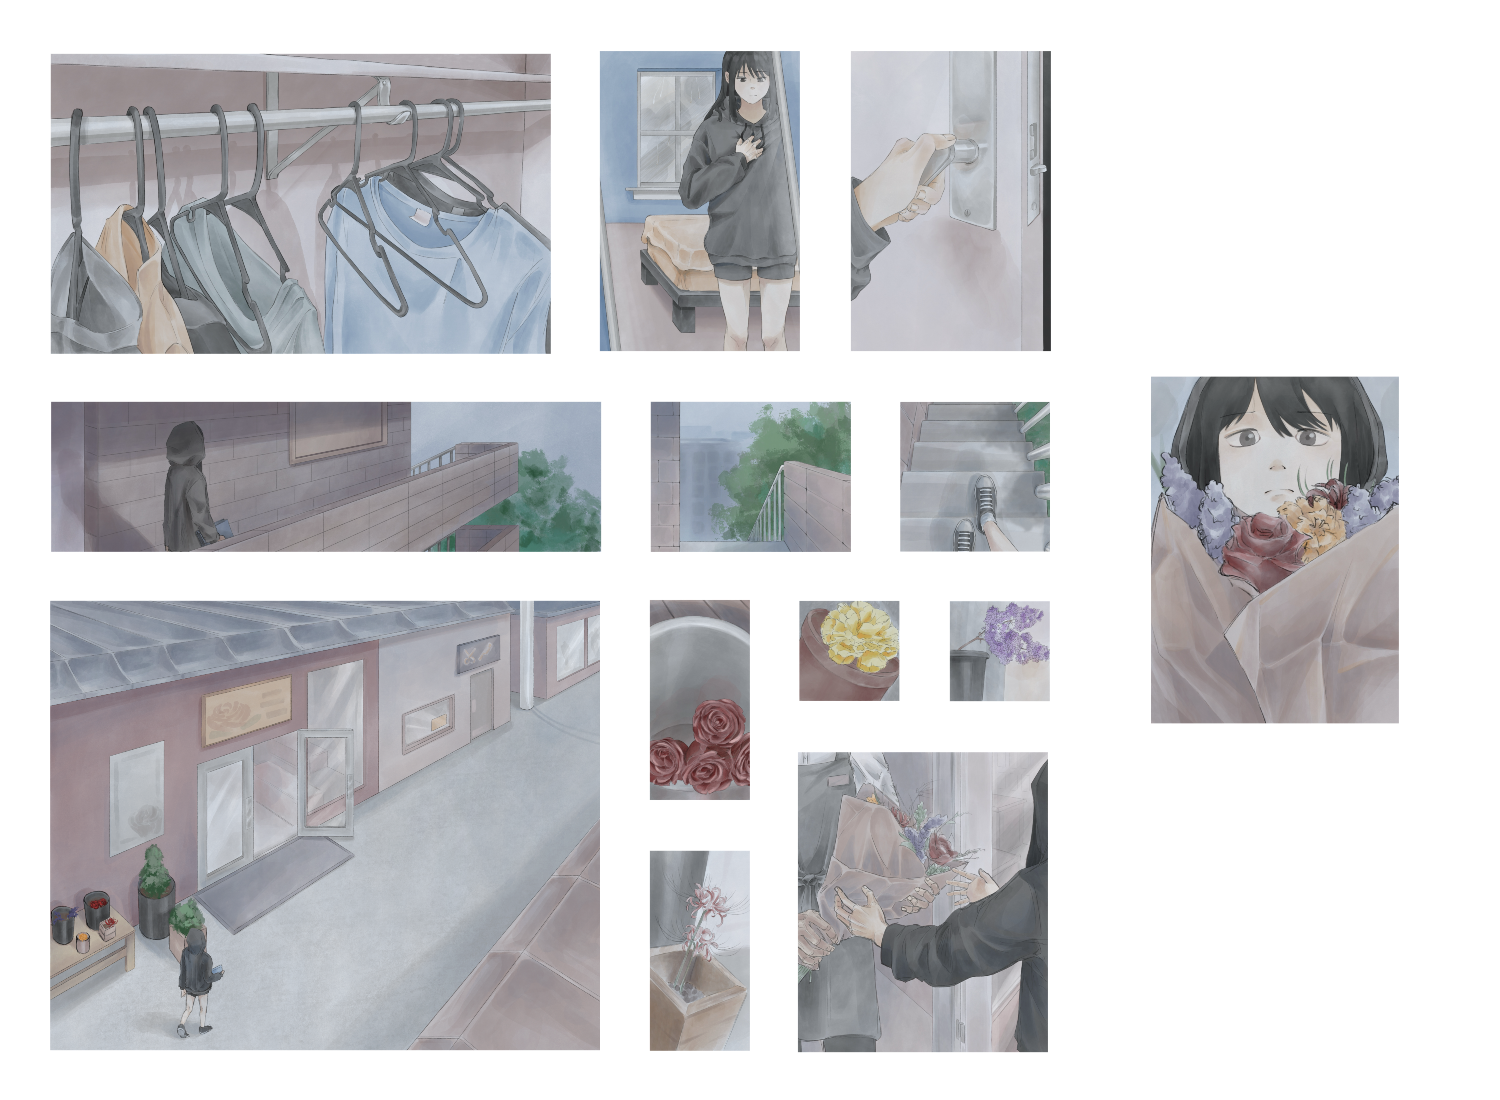 Panels of the girl getting ready to go out and goes to a florist to purchase a bouquet of flowers.